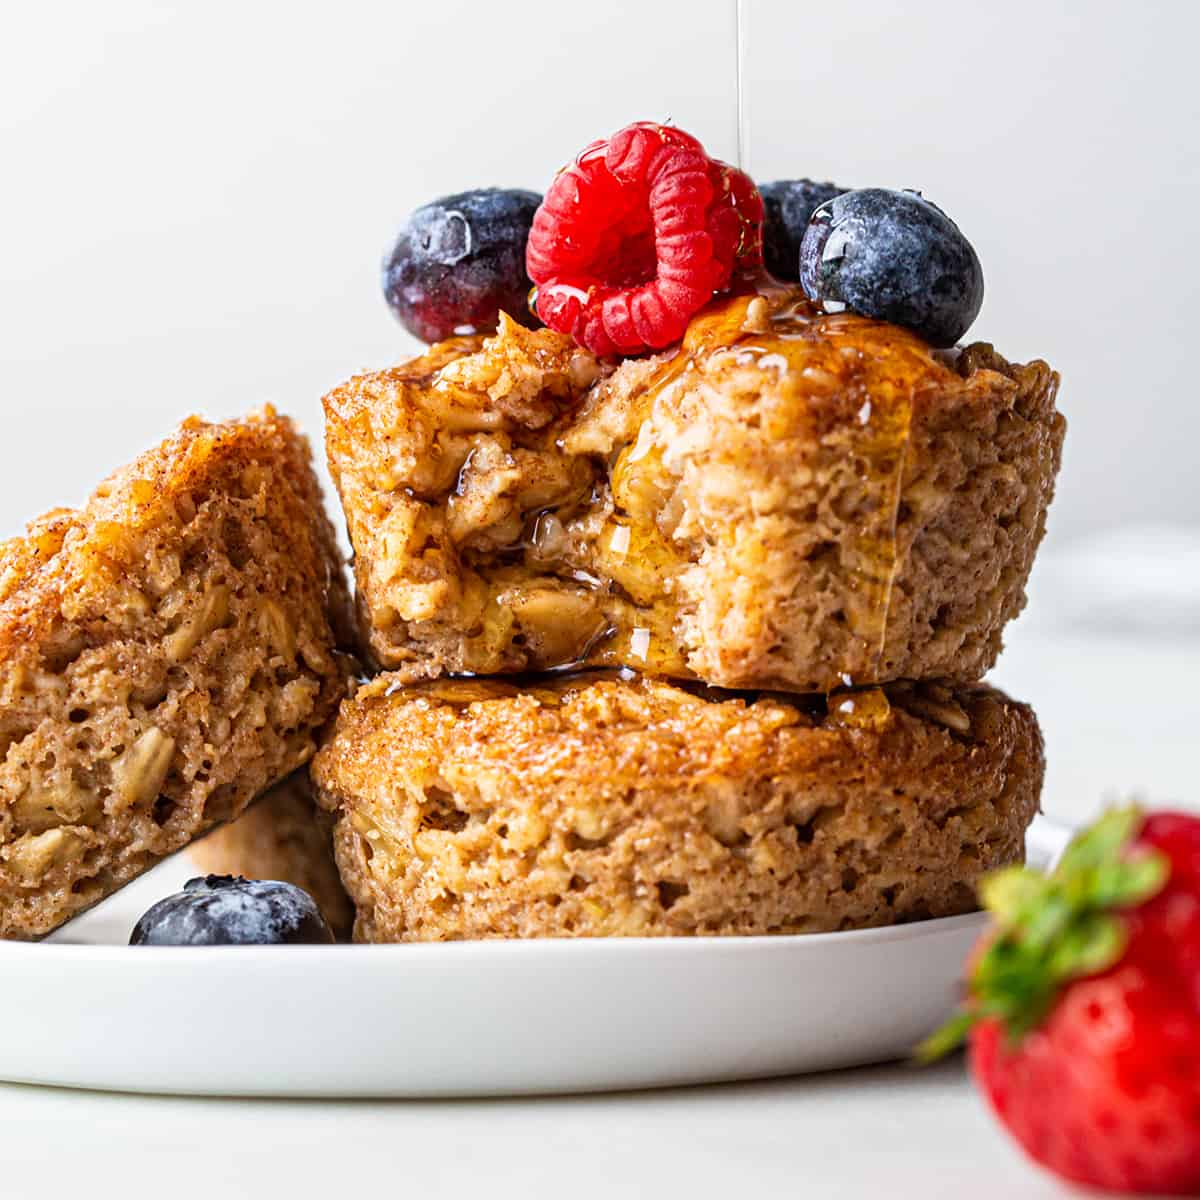 3 Baked Oatmeal Cups with berries and maple syrup